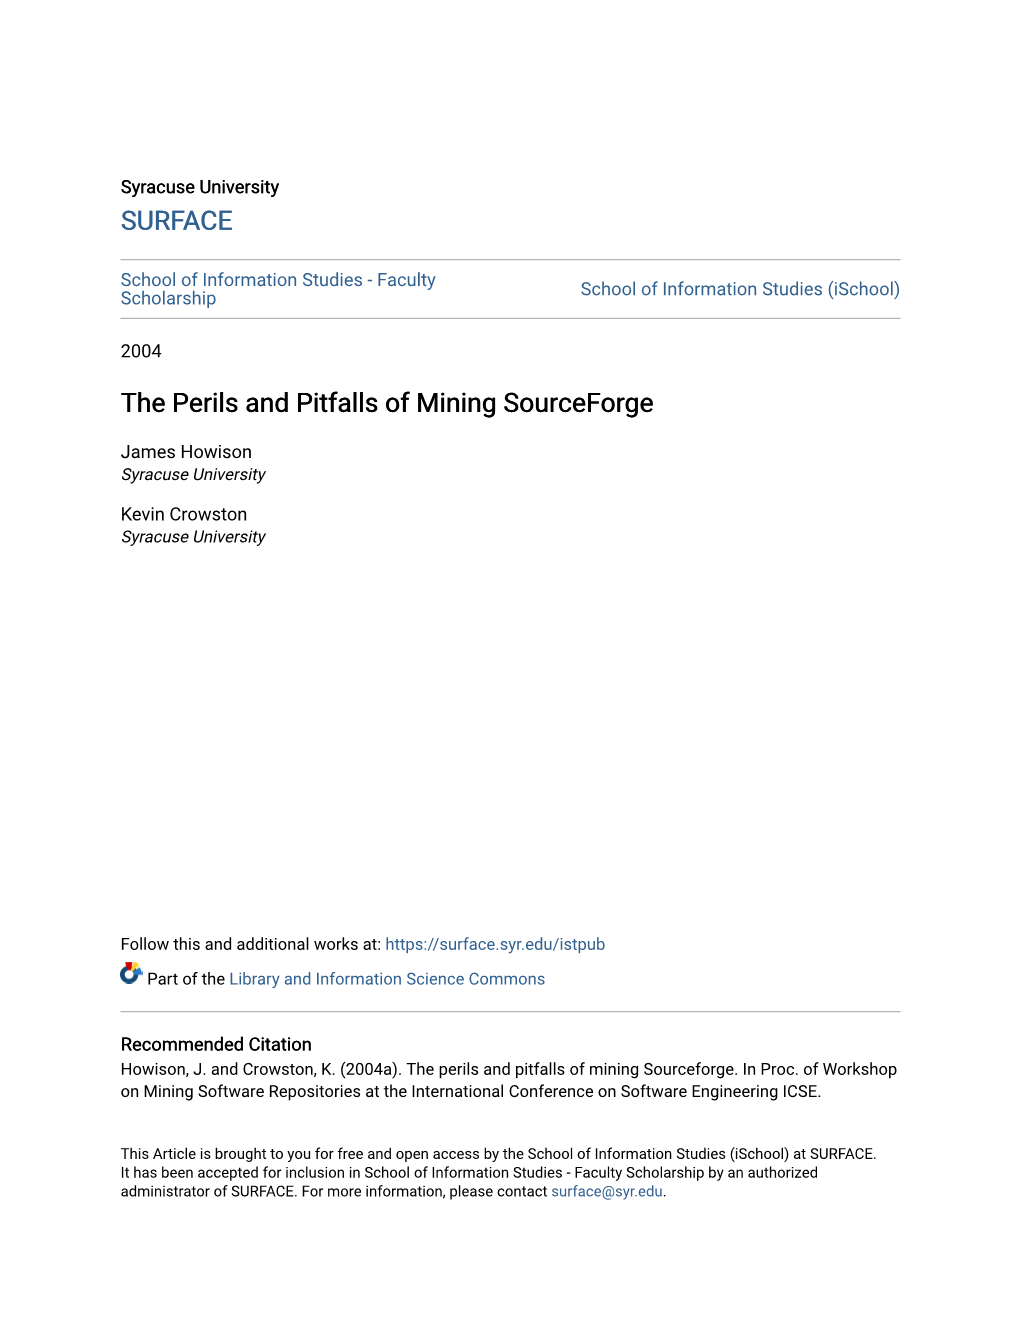 The Perils and Pitfalls of Mining Sourceforge